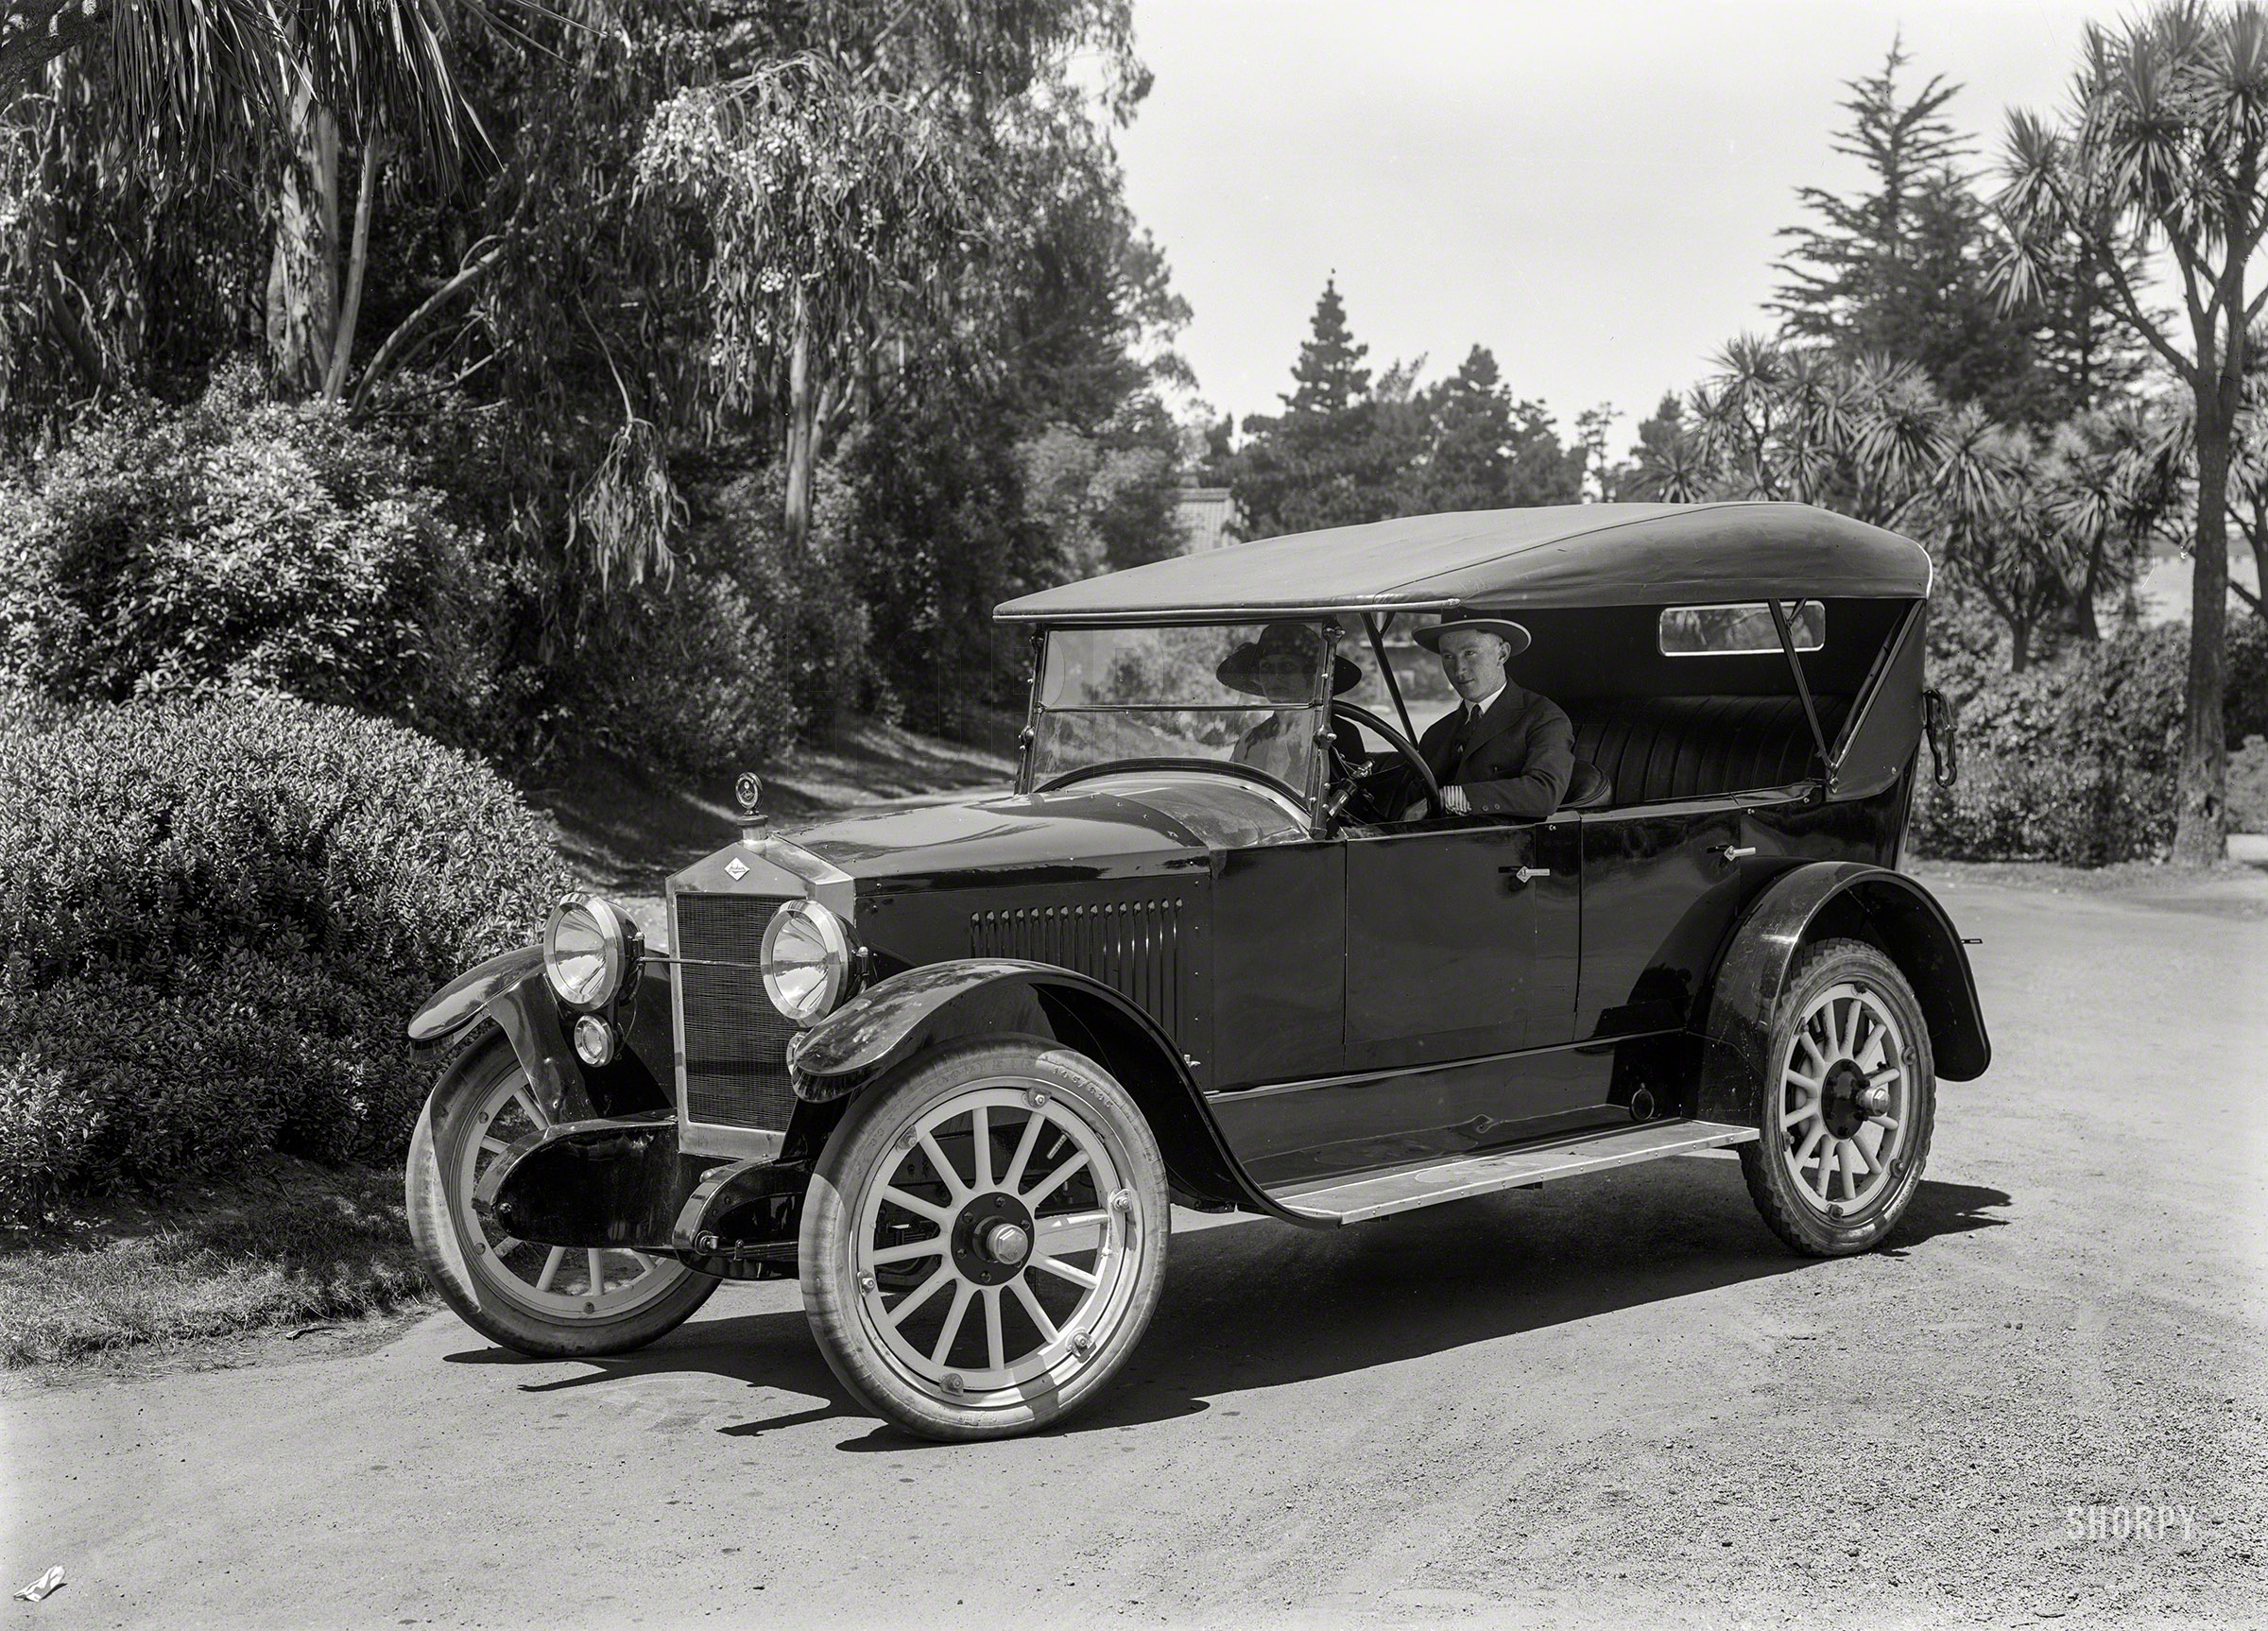 San Francisco circa 1920. "Jackson Six touring car at Golden Gate Park." Named after the Michigan city of its manufacture, the Jackson boasted "No hill too steep, no sand too deep." Models of "The Car With the Keystone Radiator" included the Wolverine Eight, Olympic, Sultanic Six and Convertible Torpedo. 5x7 glass negative by Christopher Helin. View full size.